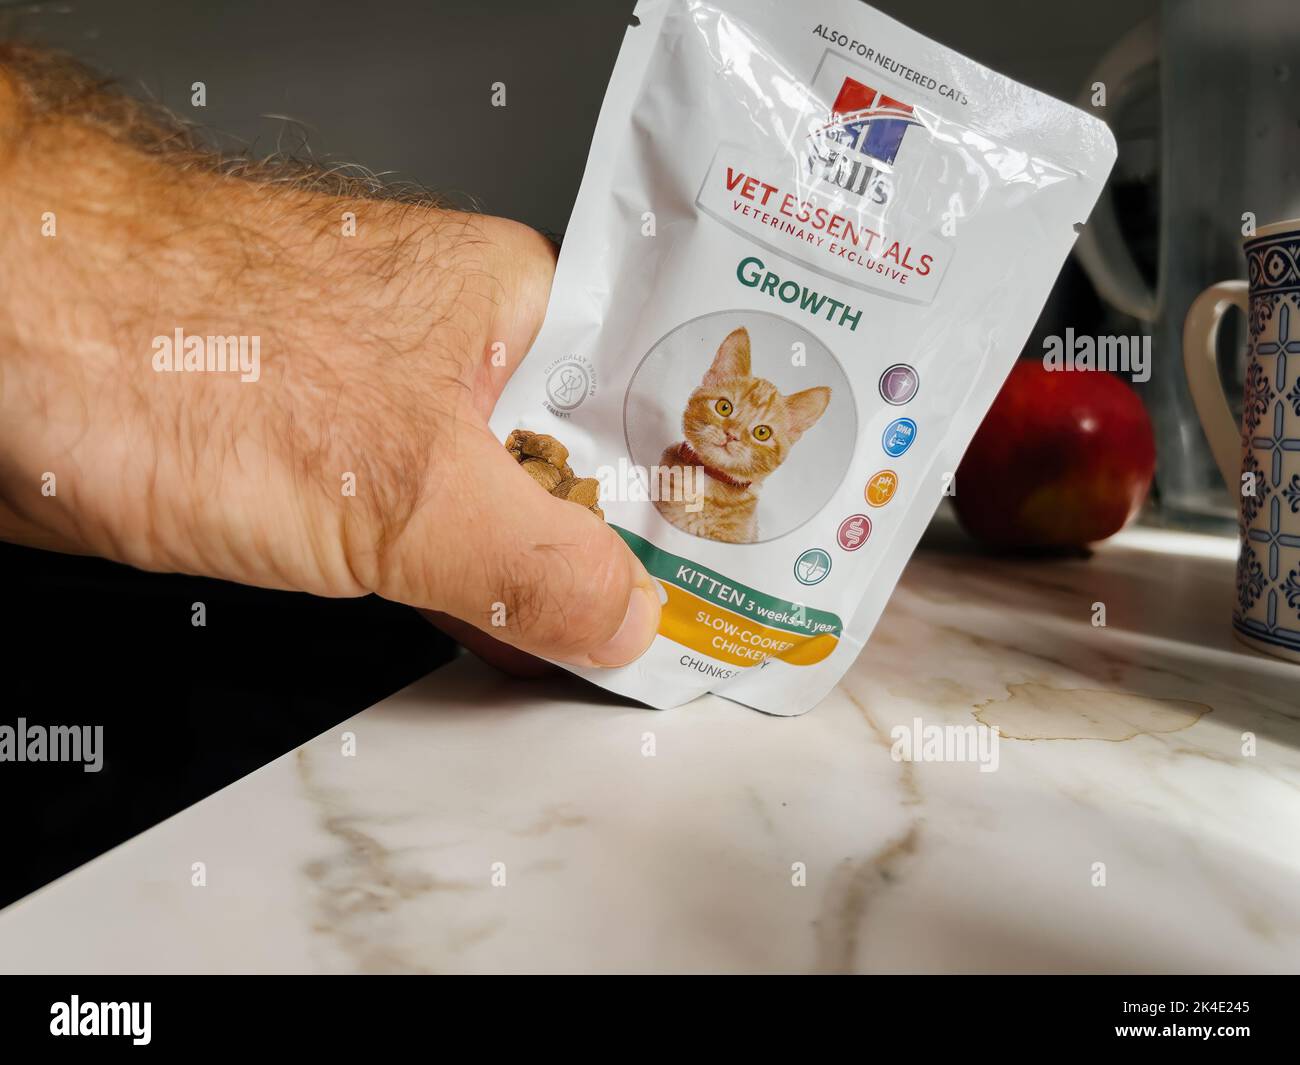 Paris, France - Sep 13, 2022: POV male hand holding carton package with pouches with Hills Vet Essentials growth - modern kitchen background preparing to feed the pet cat animal Stock Photo